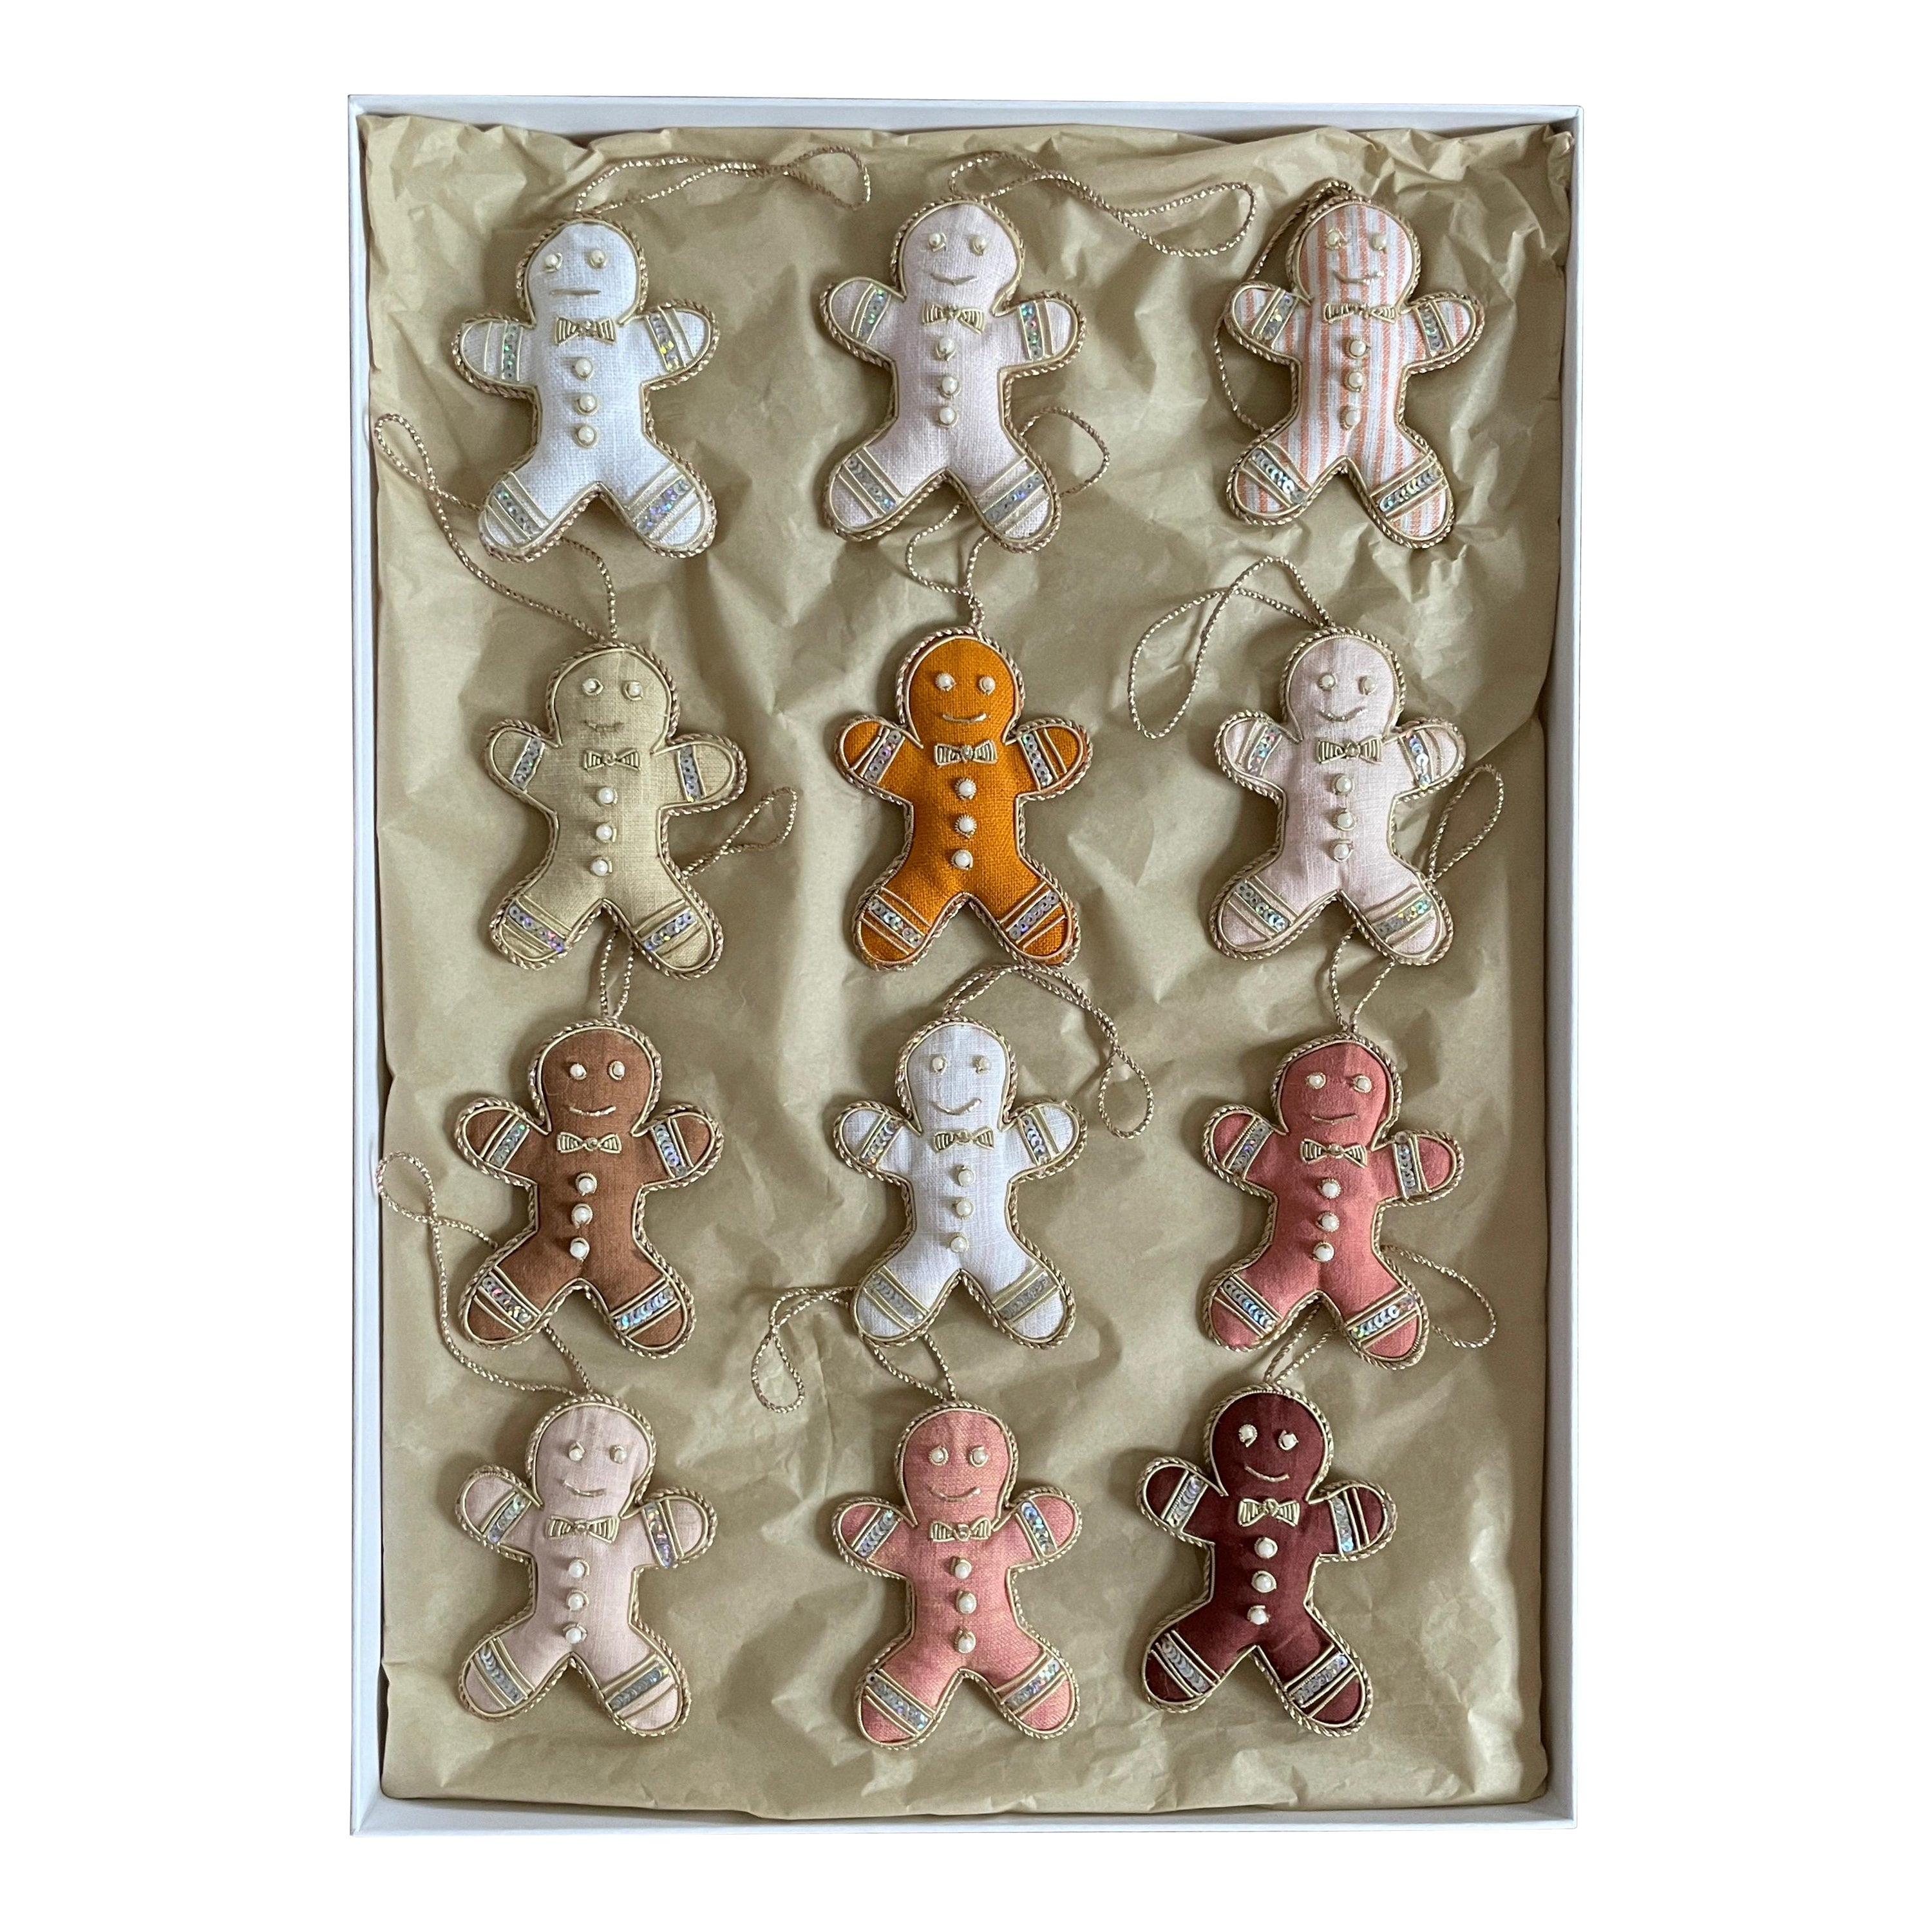 Set of 12 limited edition Artisan Irish linen gingerbread men ornaments by Katie Larmour

This is a luxury box set of artisan made decorative ornaments created with authentic Irish Linen, exclusive to 1stdibs. They are special because they are